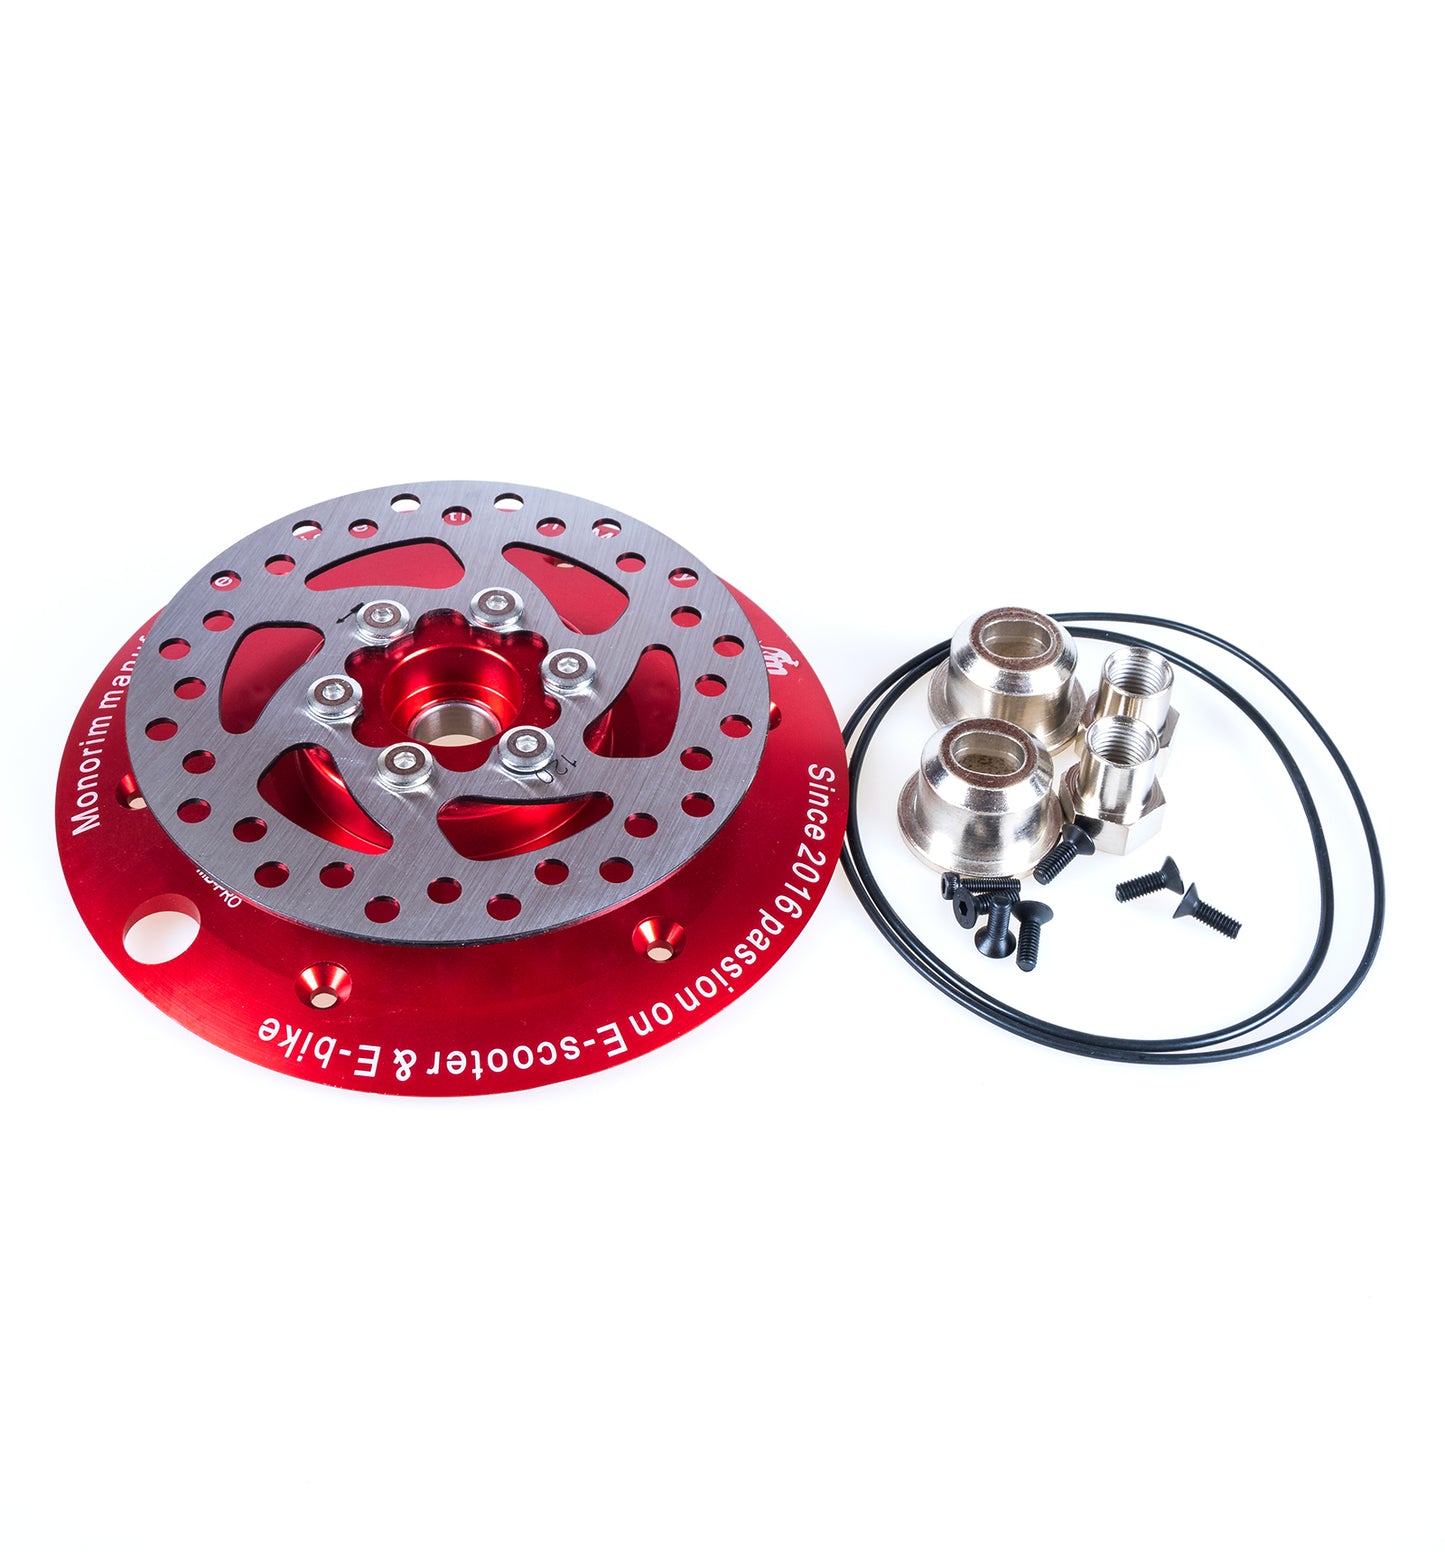 Monorim MD Pro Motor Deck Upgrade Disc Brake Parts For Xiaomi Scooter pro2/pro1, 120mm for Rear Motor